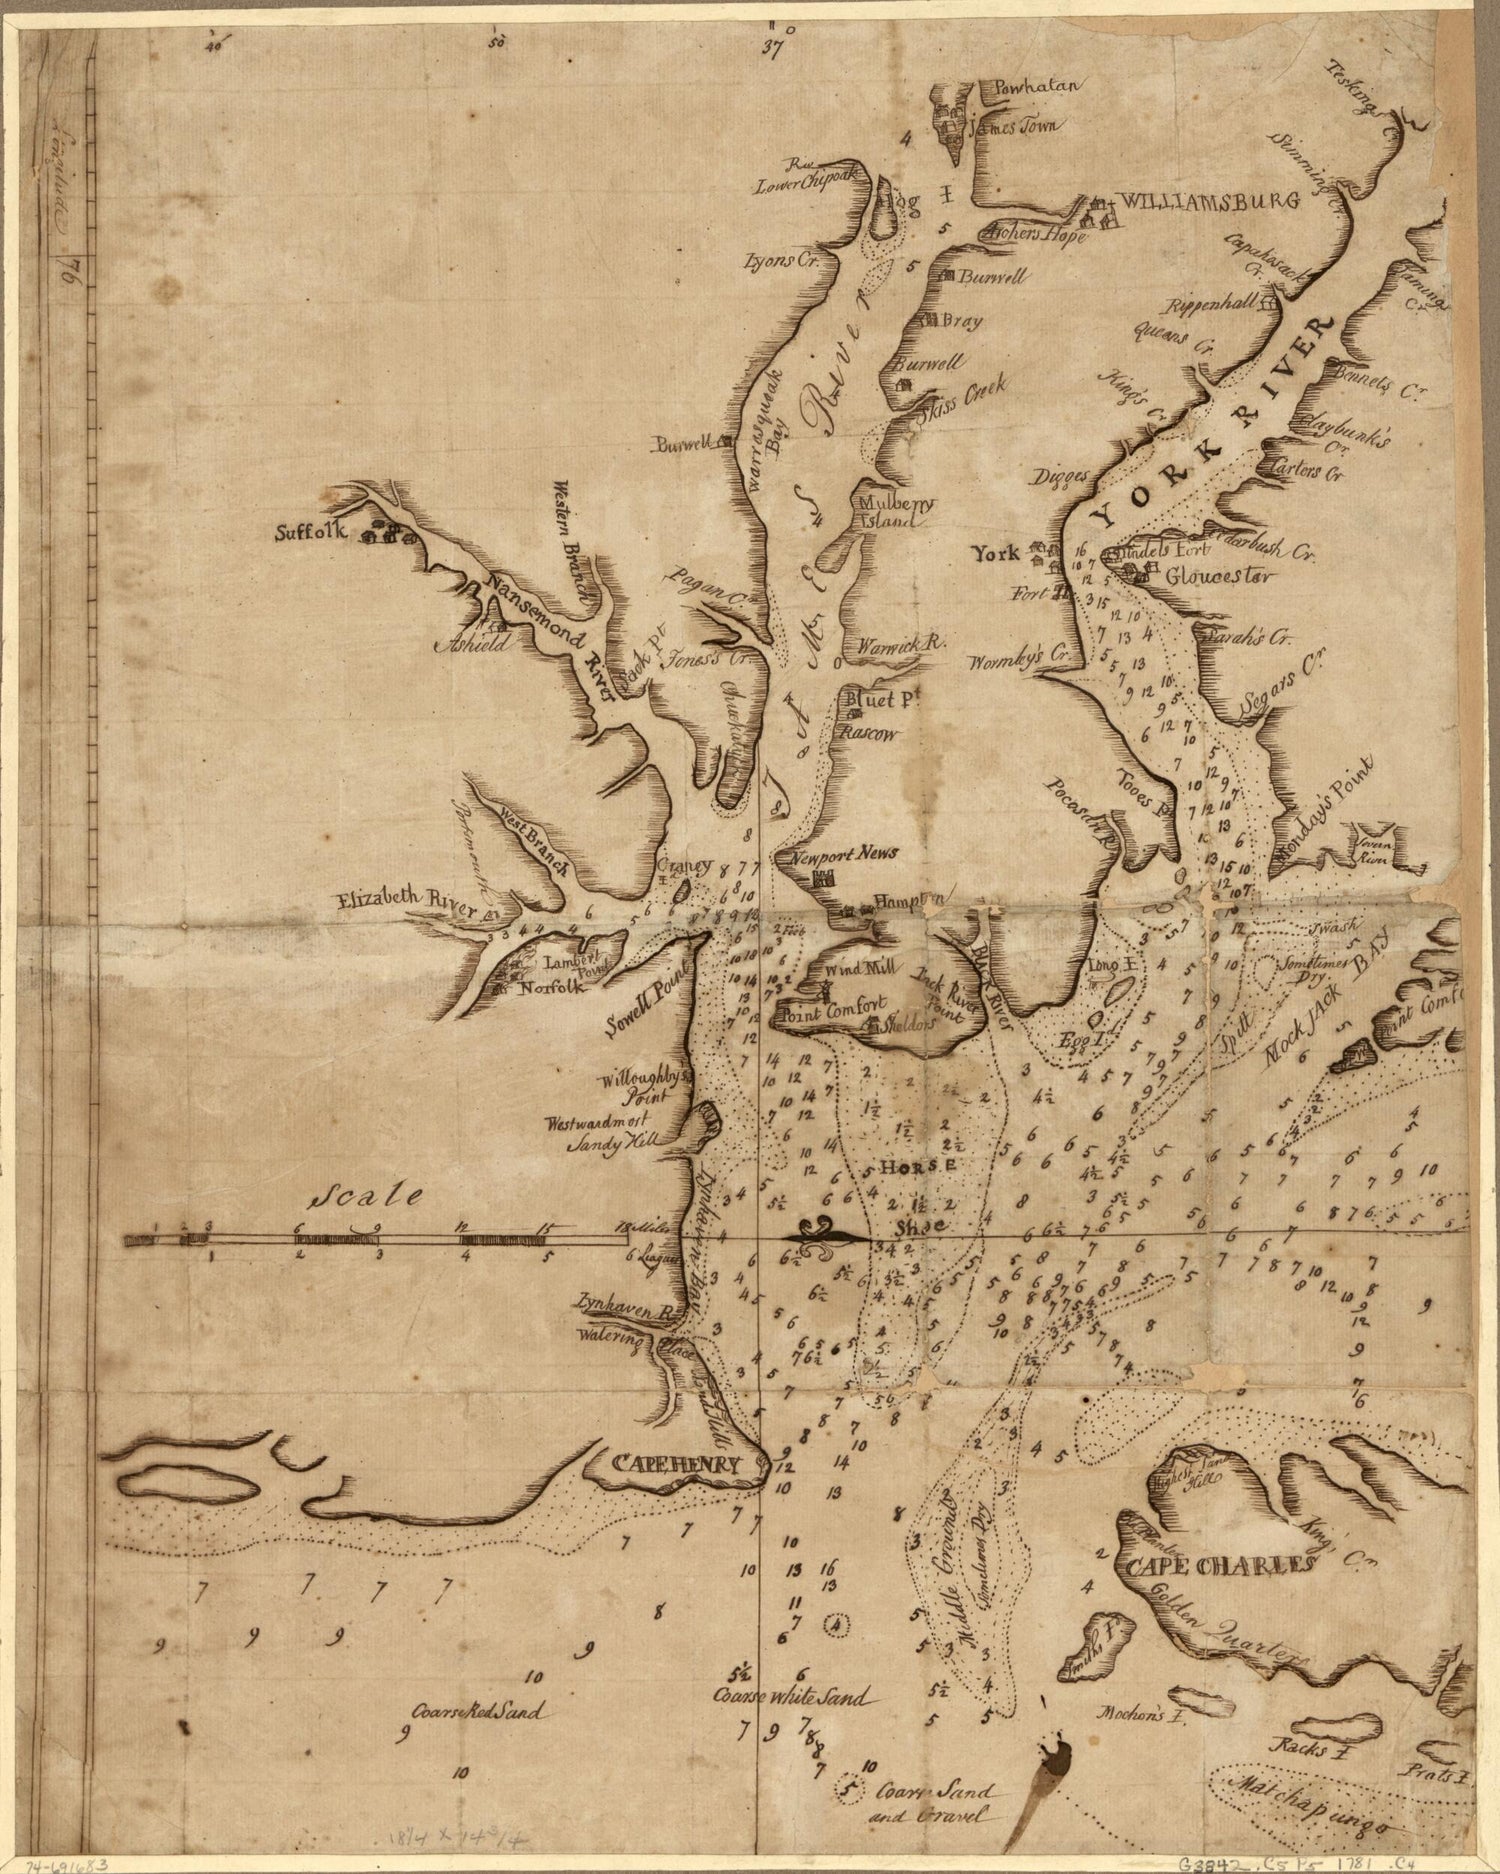 This old map of Chart Showing the Depth of the James and York Rivers As They Enter Chesapeake Bay, With Towns Adjacent from 1781 was created by  in 1781